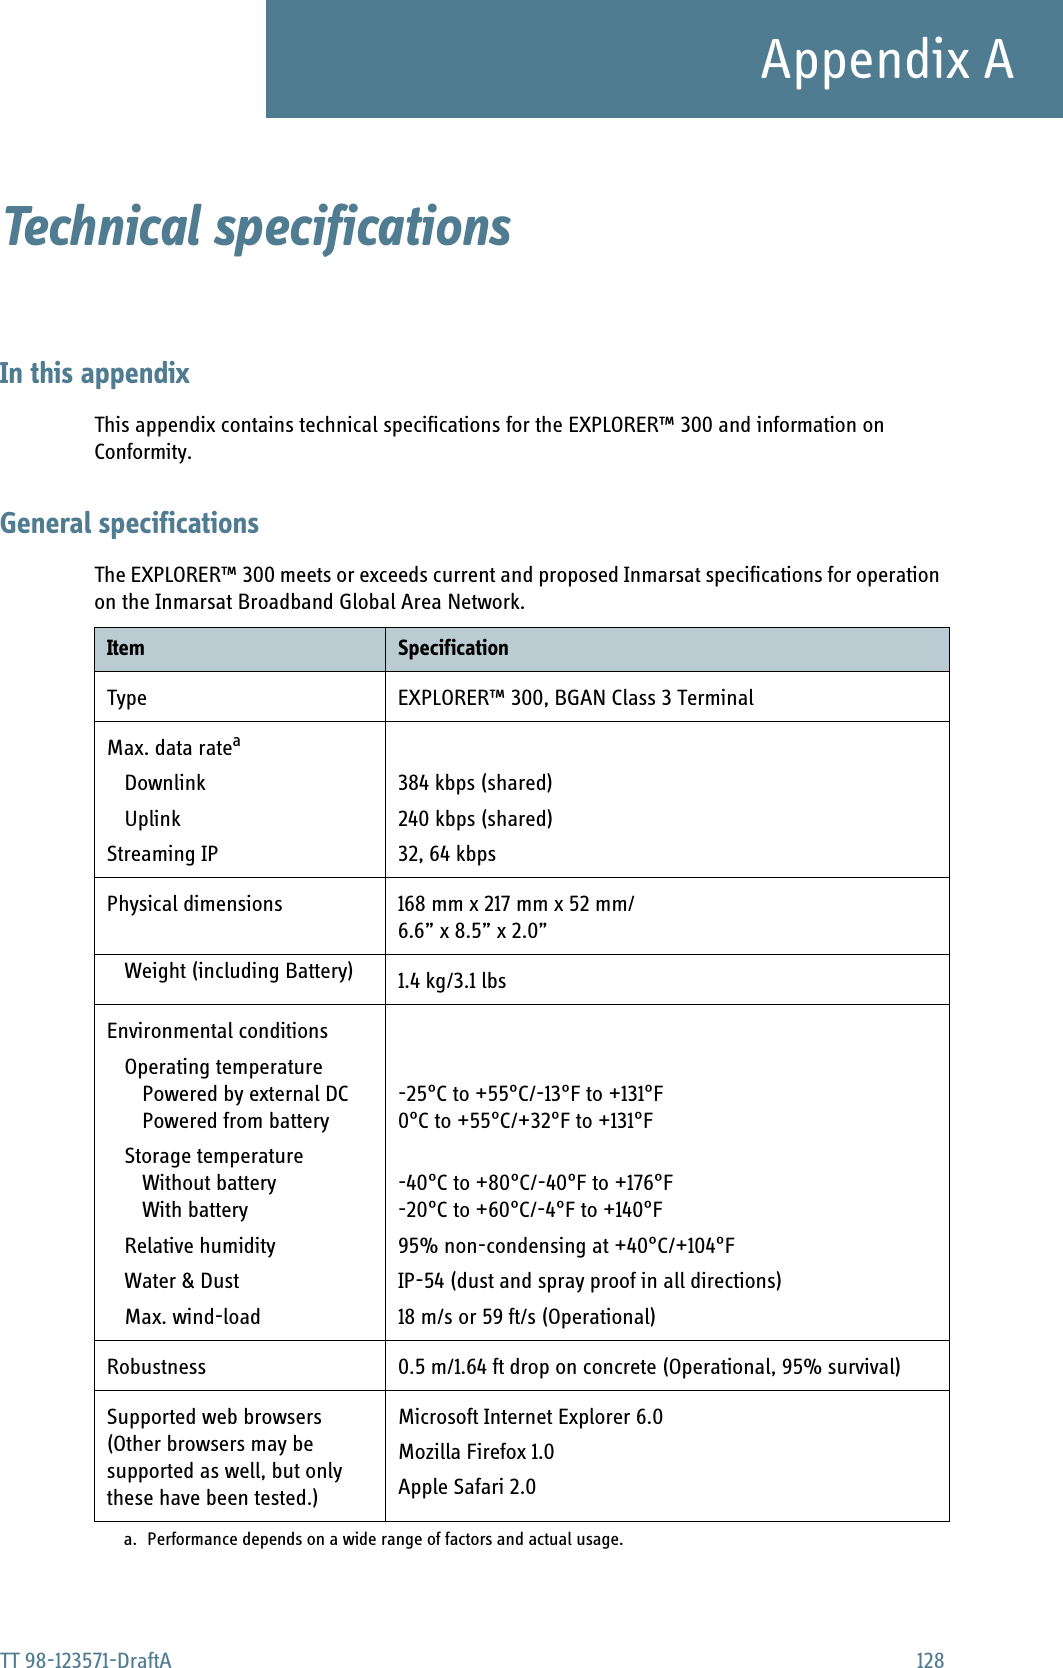 TT 98-123571-DraftA 128Appendix ATechnical specifications AIn this appendixThis appendix contains technical specifications for the EXPLORER™ 300 and information on Conformity. General specificationsThe EXPLORER™ 300 meets or exceeds current and proposed Inmarsat specifications for operation on the Inmarsat Broadband Global Area Network.Item SpecificationType EXPLORER™ 300, BGAN Class 3 TerminalMax. data rateaDownlinkUplinkStreaming IPa. Performance depends on a wide range of factors and actual usage.384 kbps (shared)240 kbps (shared)32, 64 kbpsPhysical dimensions 168 mm x 217 mm x 52 mm/6.6” x 8.5” x 2.0”Weight (including Battery) 1.4 kg/3.1 lbsEnvironmental conditionsOperating temperaturePowered by external DCPowered from batteryStorage temperatureWithout batteryWith batteryRelative humidityWater &amp; DustMax. wind-load-25°C to +55°C/-13°F to +131°F0°C to +55°C/+32°F to +131°F-40°C to +80°C/-40°F to +176°F -20°C to +60°C/-4°F to +140°F95% non-condensing at +40°C/+104°FIP-54 (dust and spray proof in all directions)18 m/s or 59 ft/s (Operational)Robustness 0.5 m/1.64 ft drop on concrete (Operational, 95% survival)Supported web browsers(Other browsers may be supported as well, but only these have been tested.)Microsoft Internet Explorer 6.0Mozilla Firefox 1.0Apple Safari 2.0